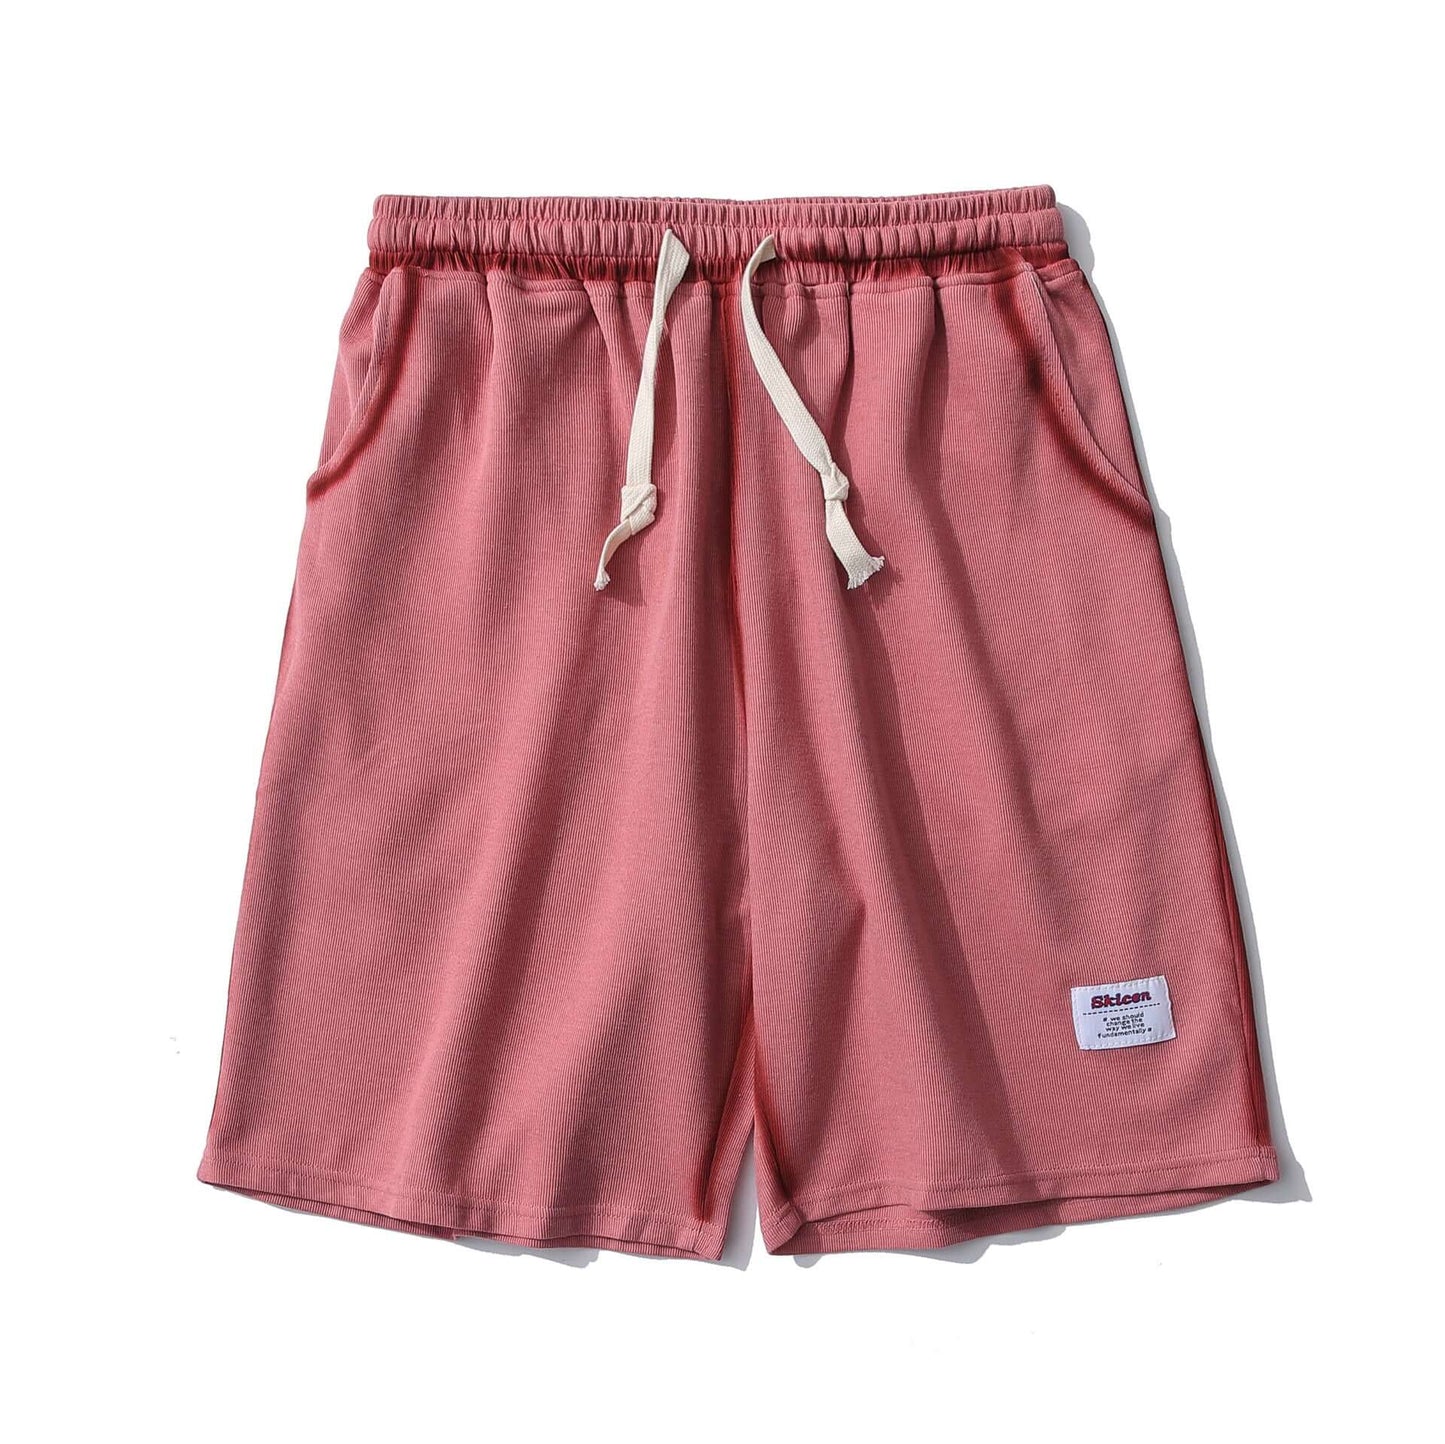 2021 summer new national tide drawstring solid color shorts men's loose beach basketball five pants trousers